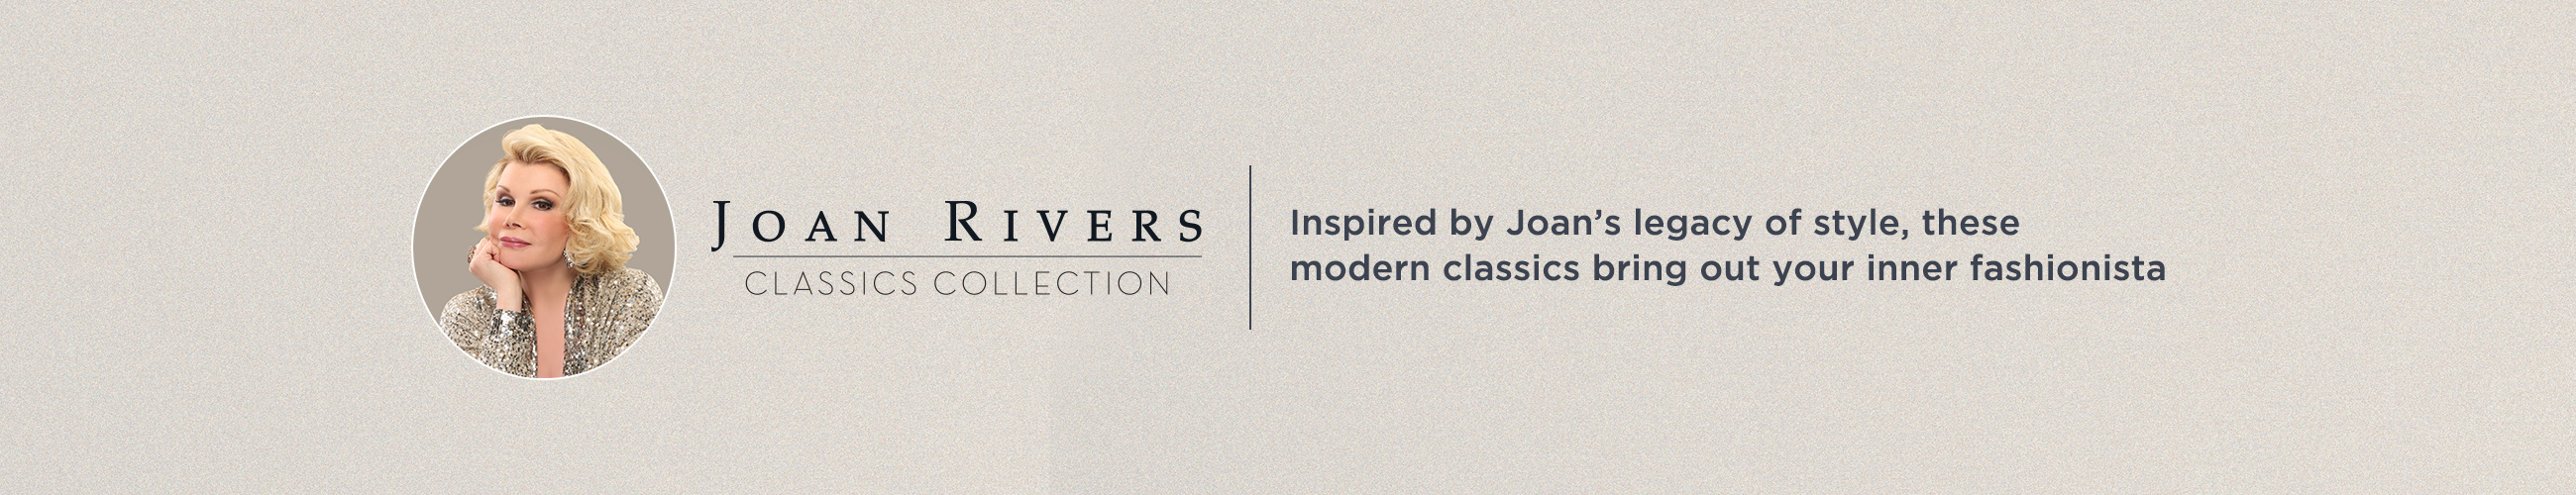 Joan Rivers Classics Collection - Inspired by Joan's legacy of style, these modern classics bring out your inner fashionista